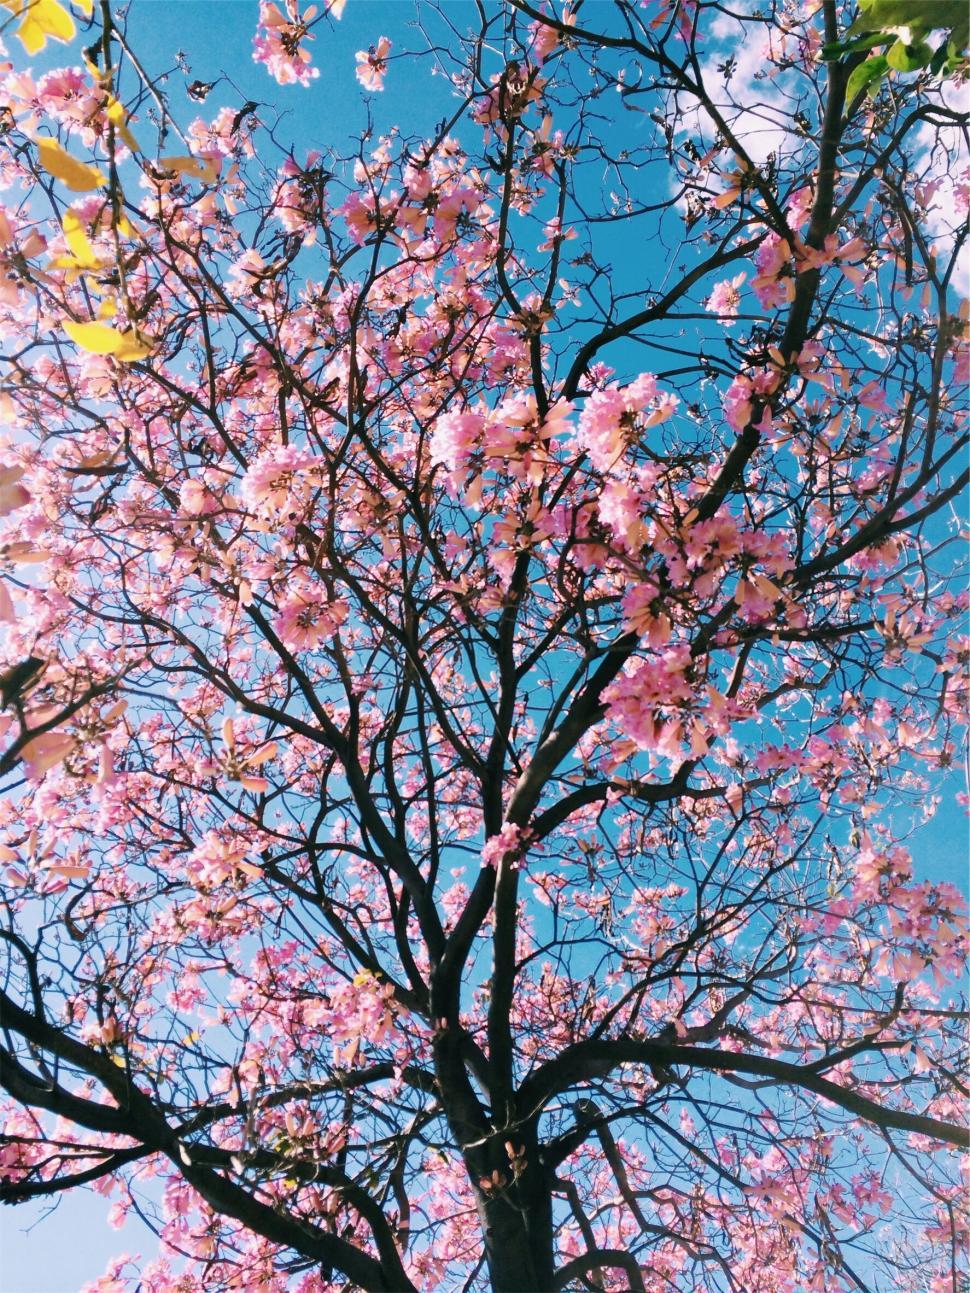 Free Image of Cherry blossom tree against blue sky 